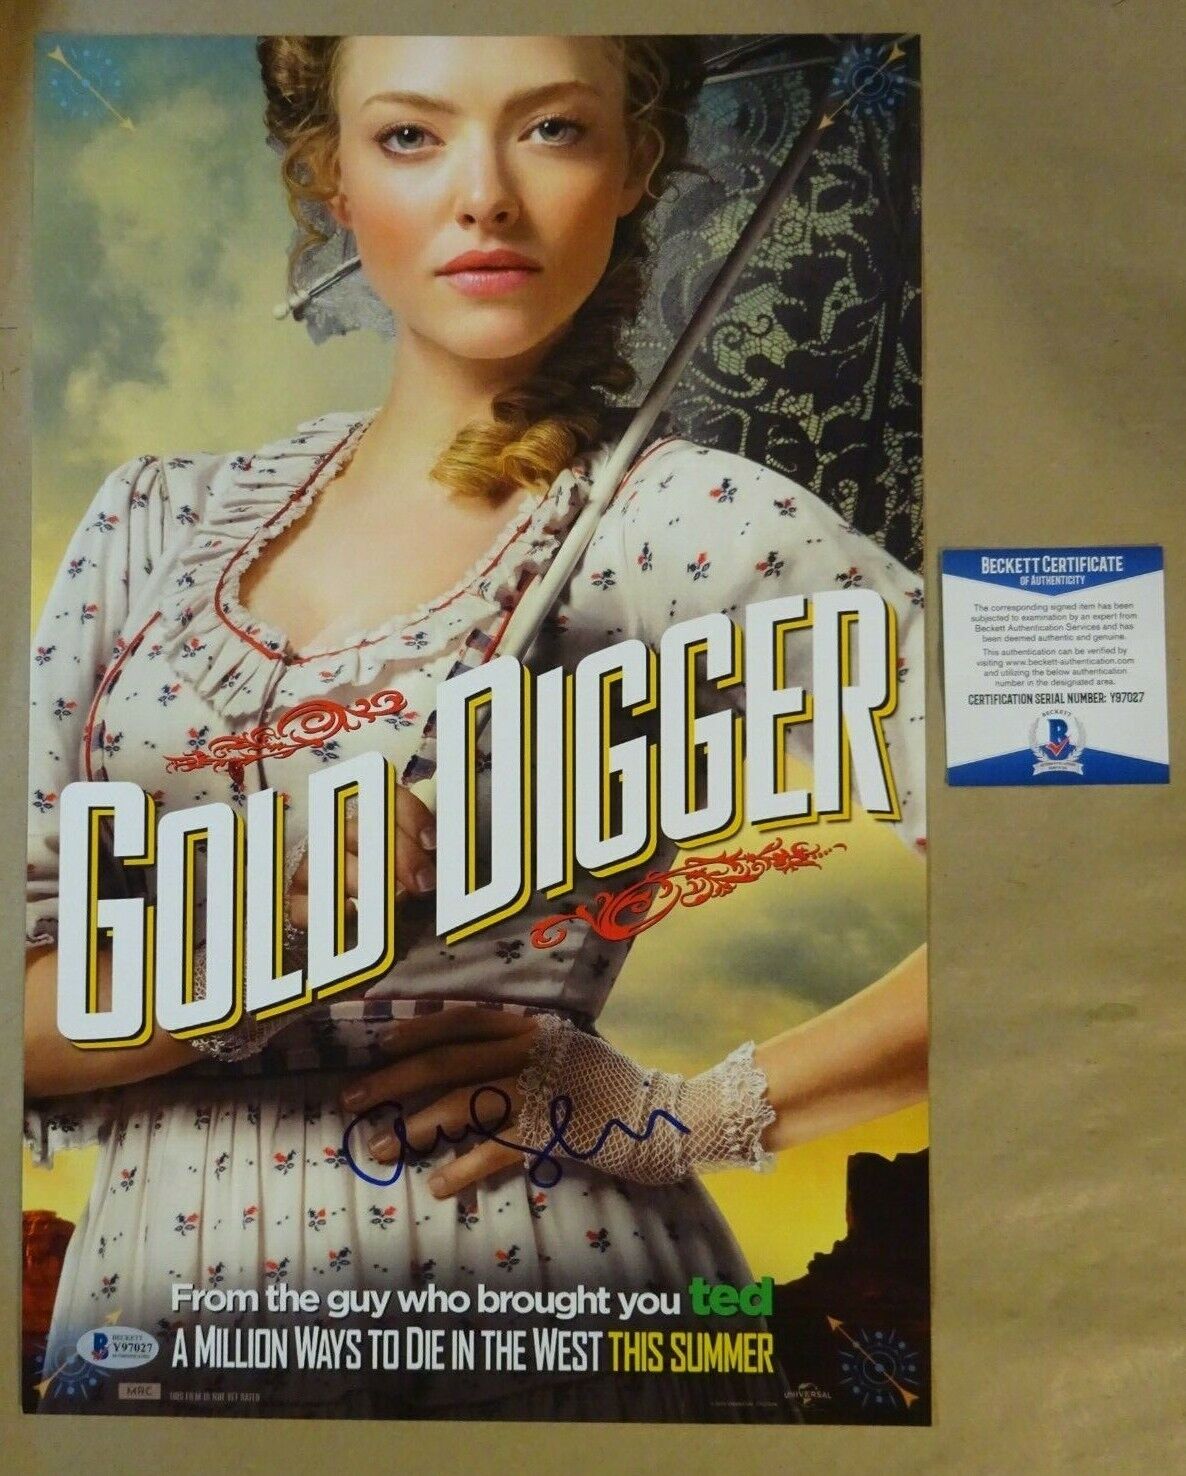 Signed AMANDA SEYFRIED - A MILLION WAYS TO DIE IN THE WEST Photo Poster painting 11x17